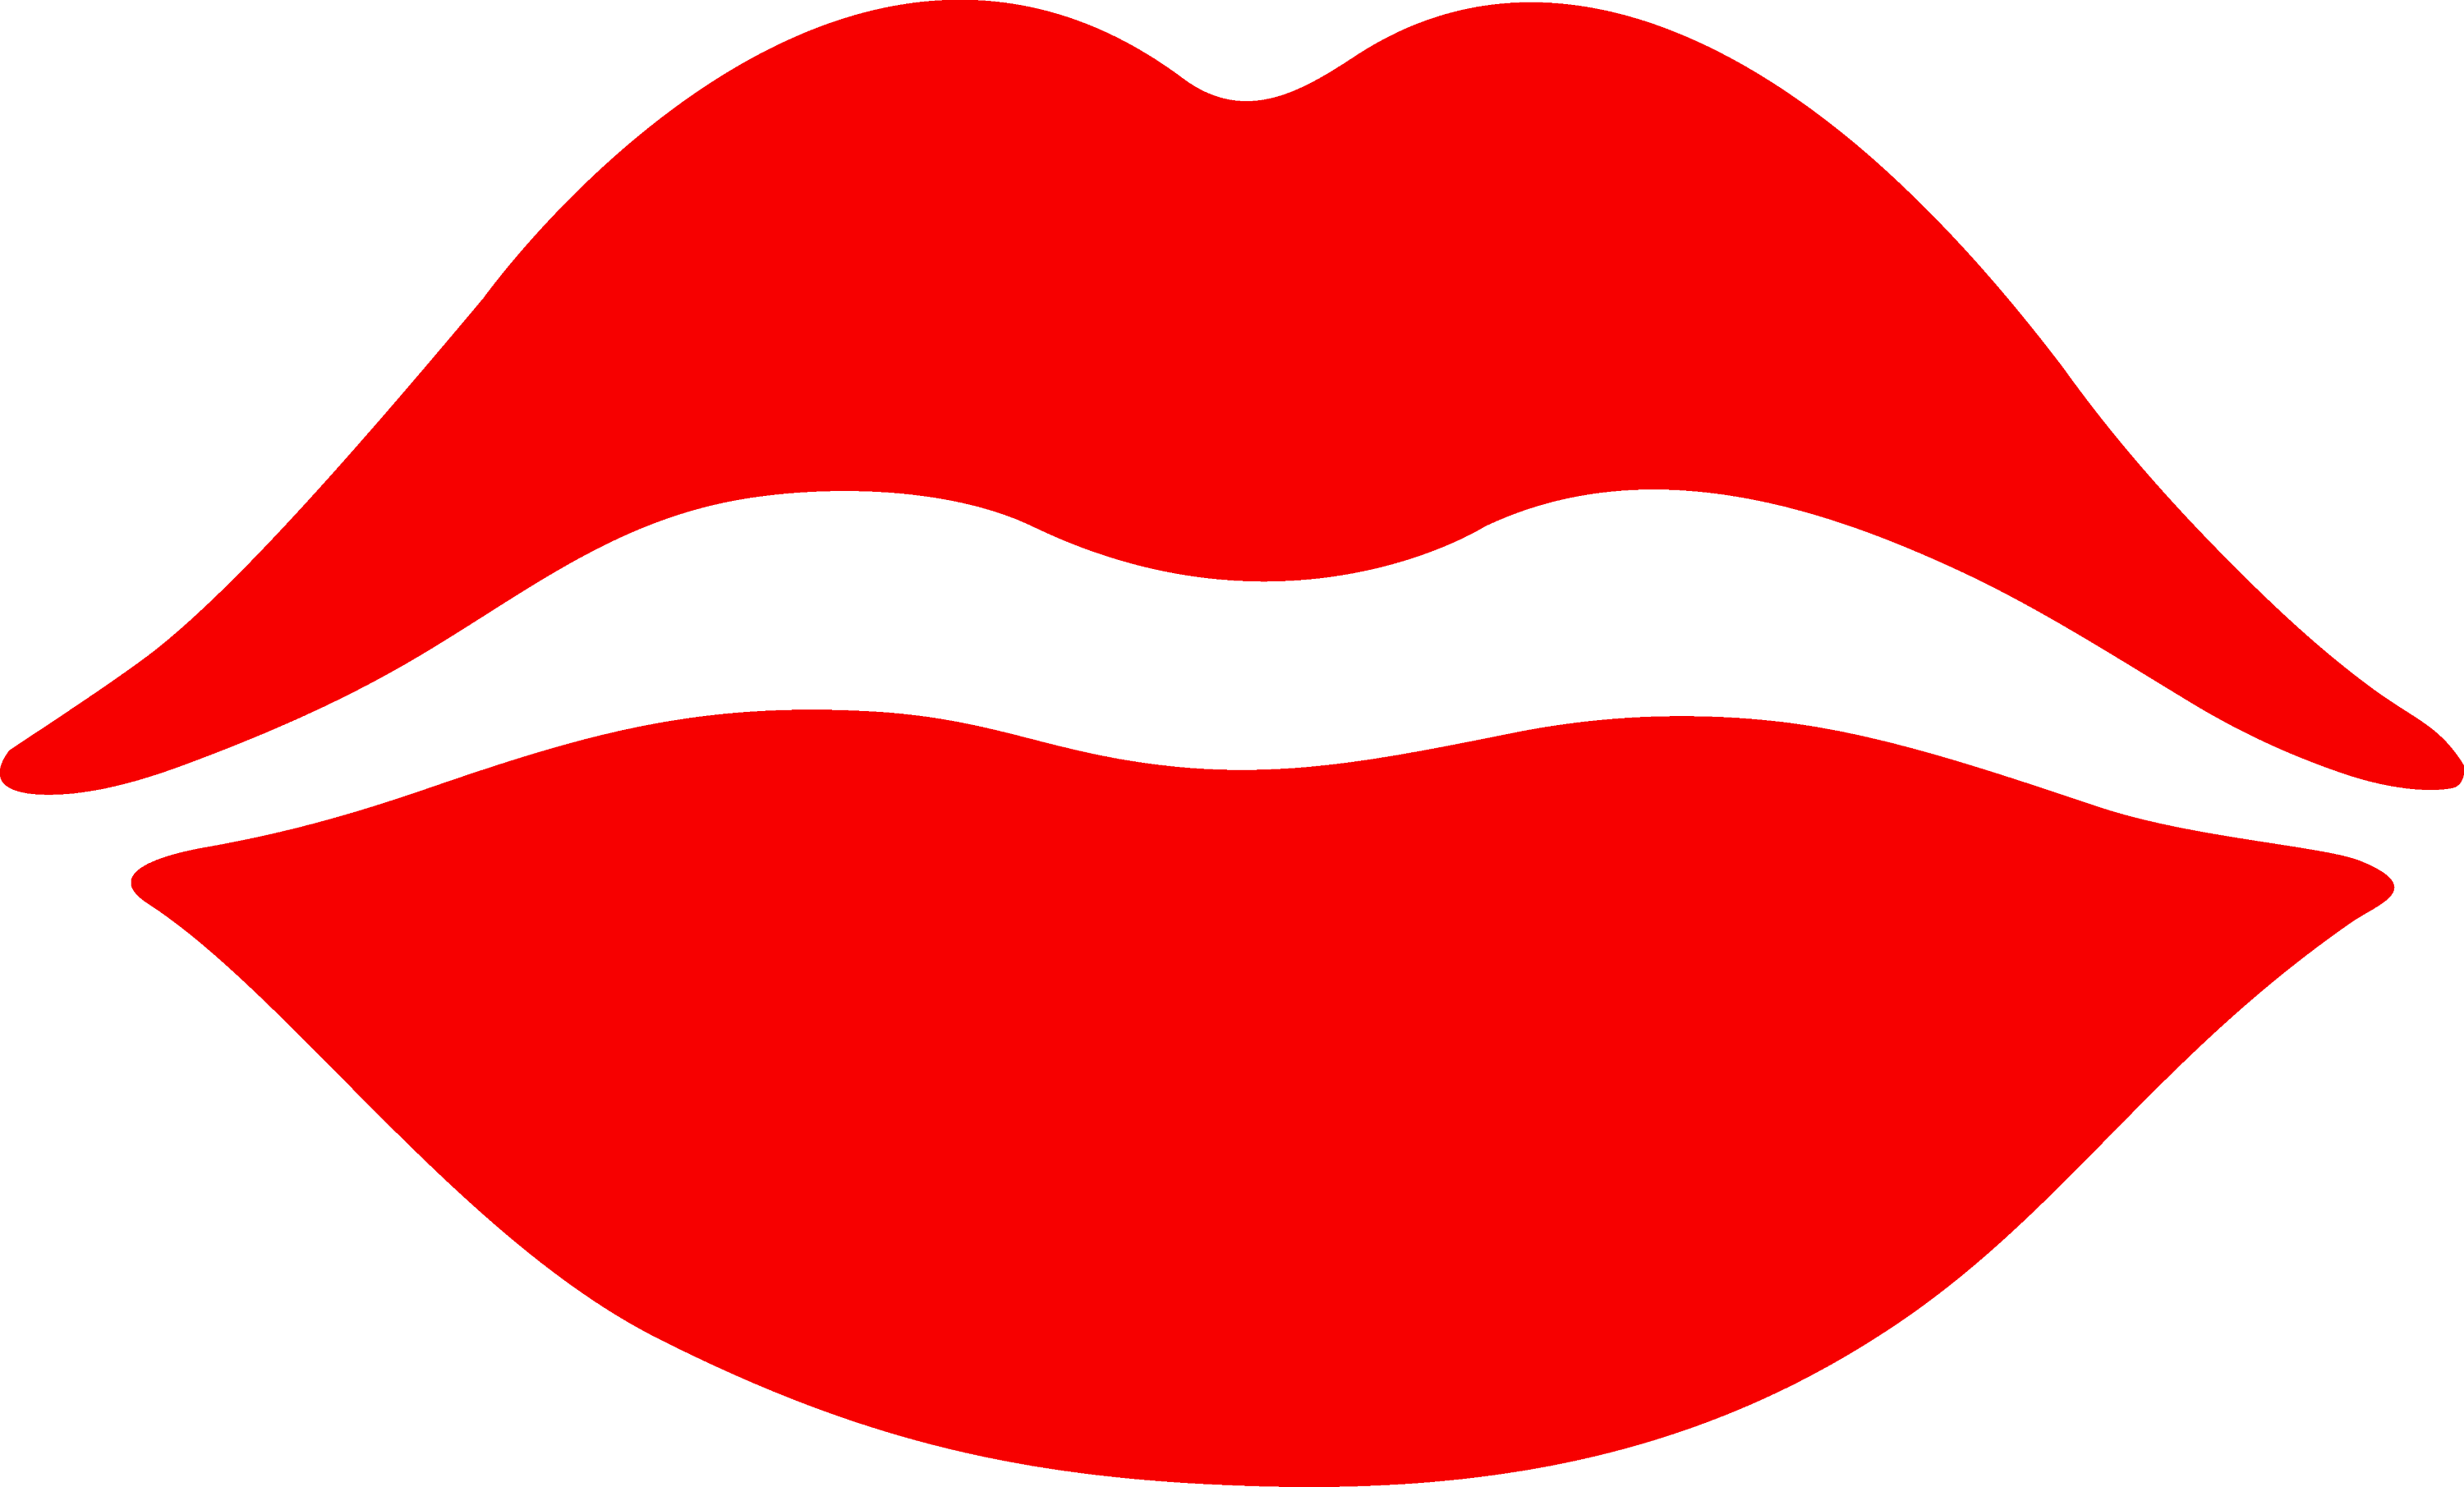 Simple Red Lips Design - Free Clip Art